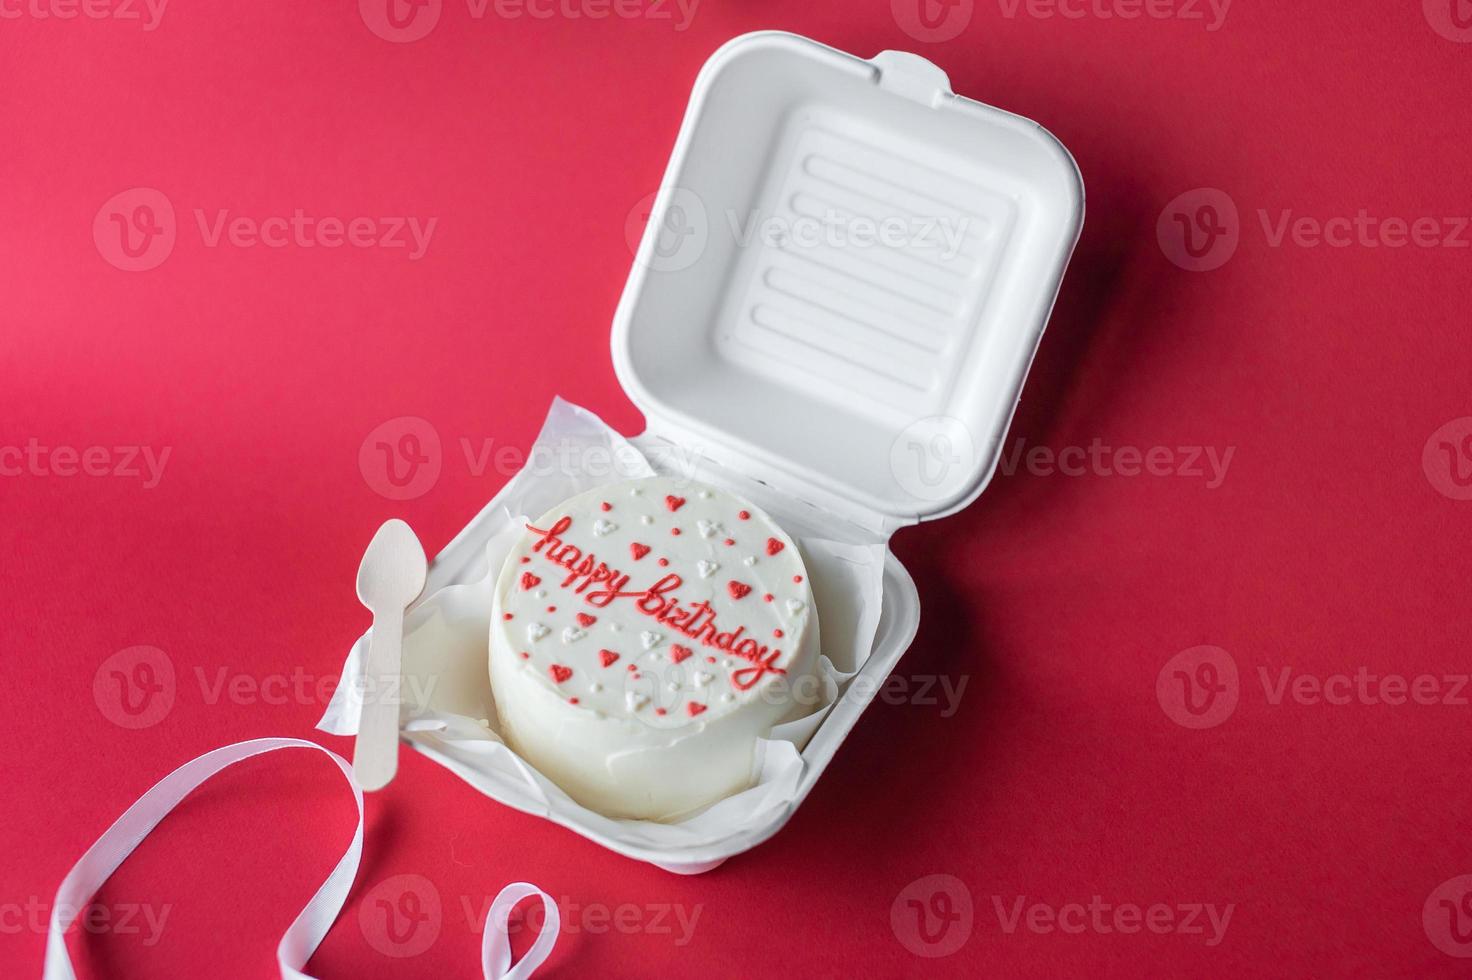 A small bento cake with lettering and hearts in a box with a wooden spoon. Red background photo